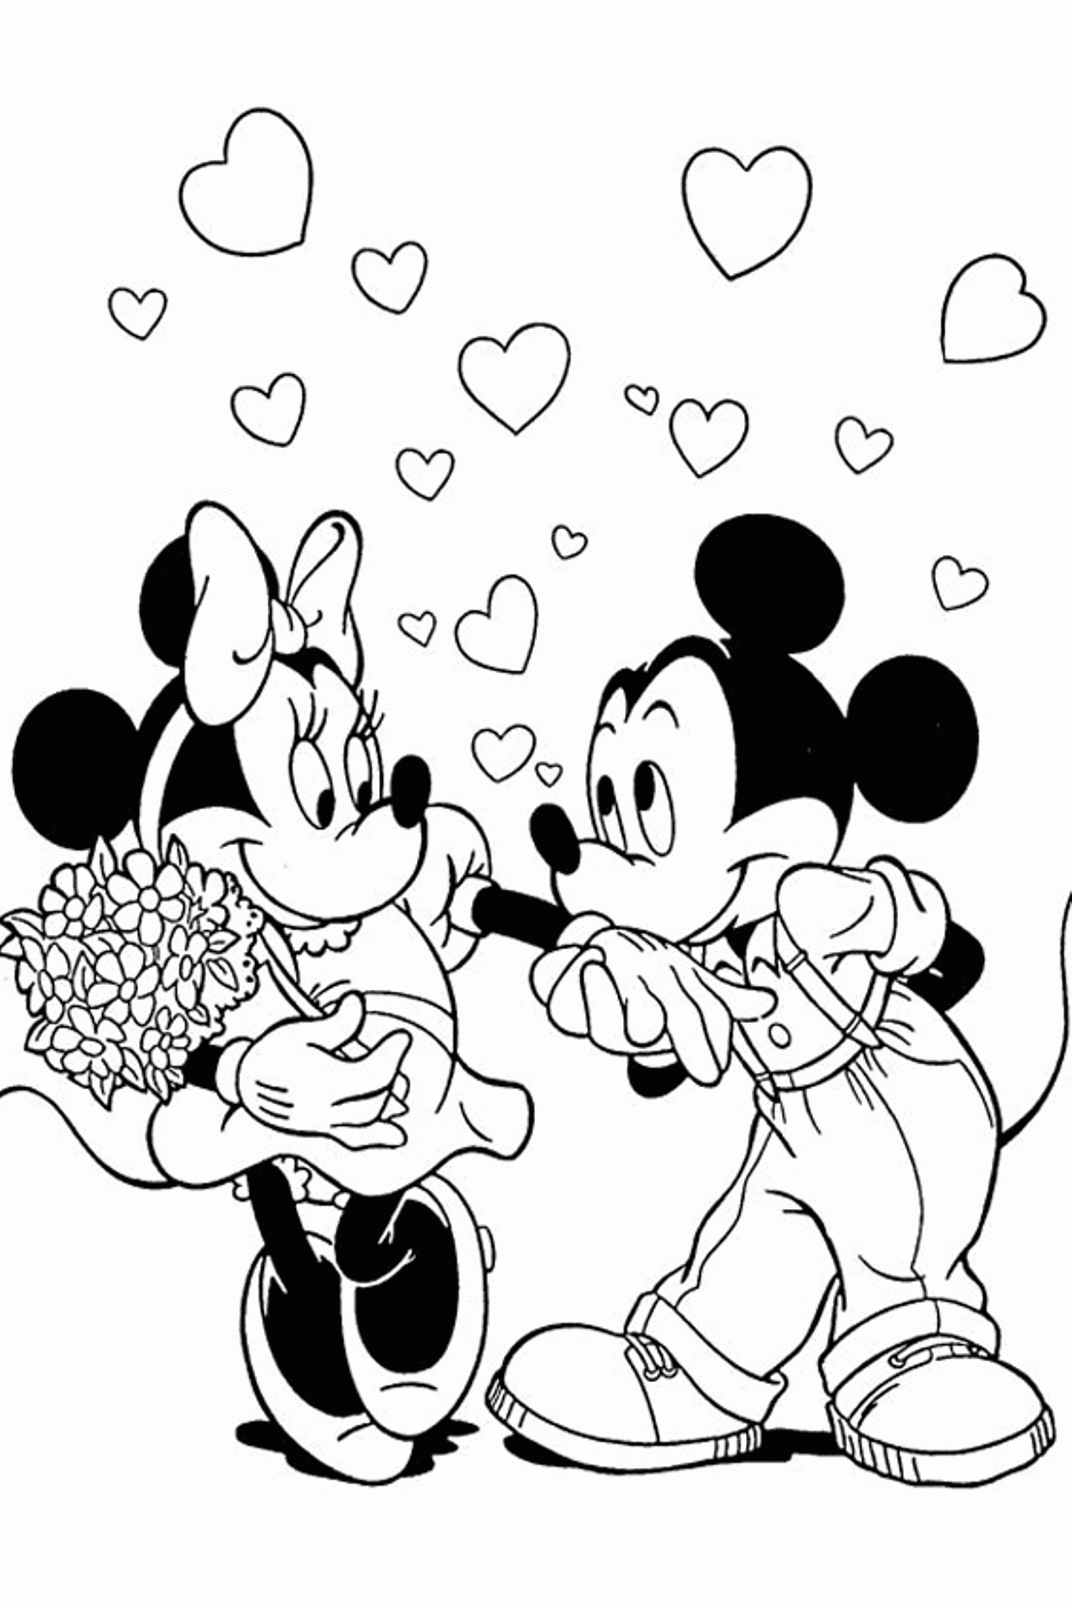 Disney Couple Valentine Coloring Pages   Valentine Coloring Pages ...